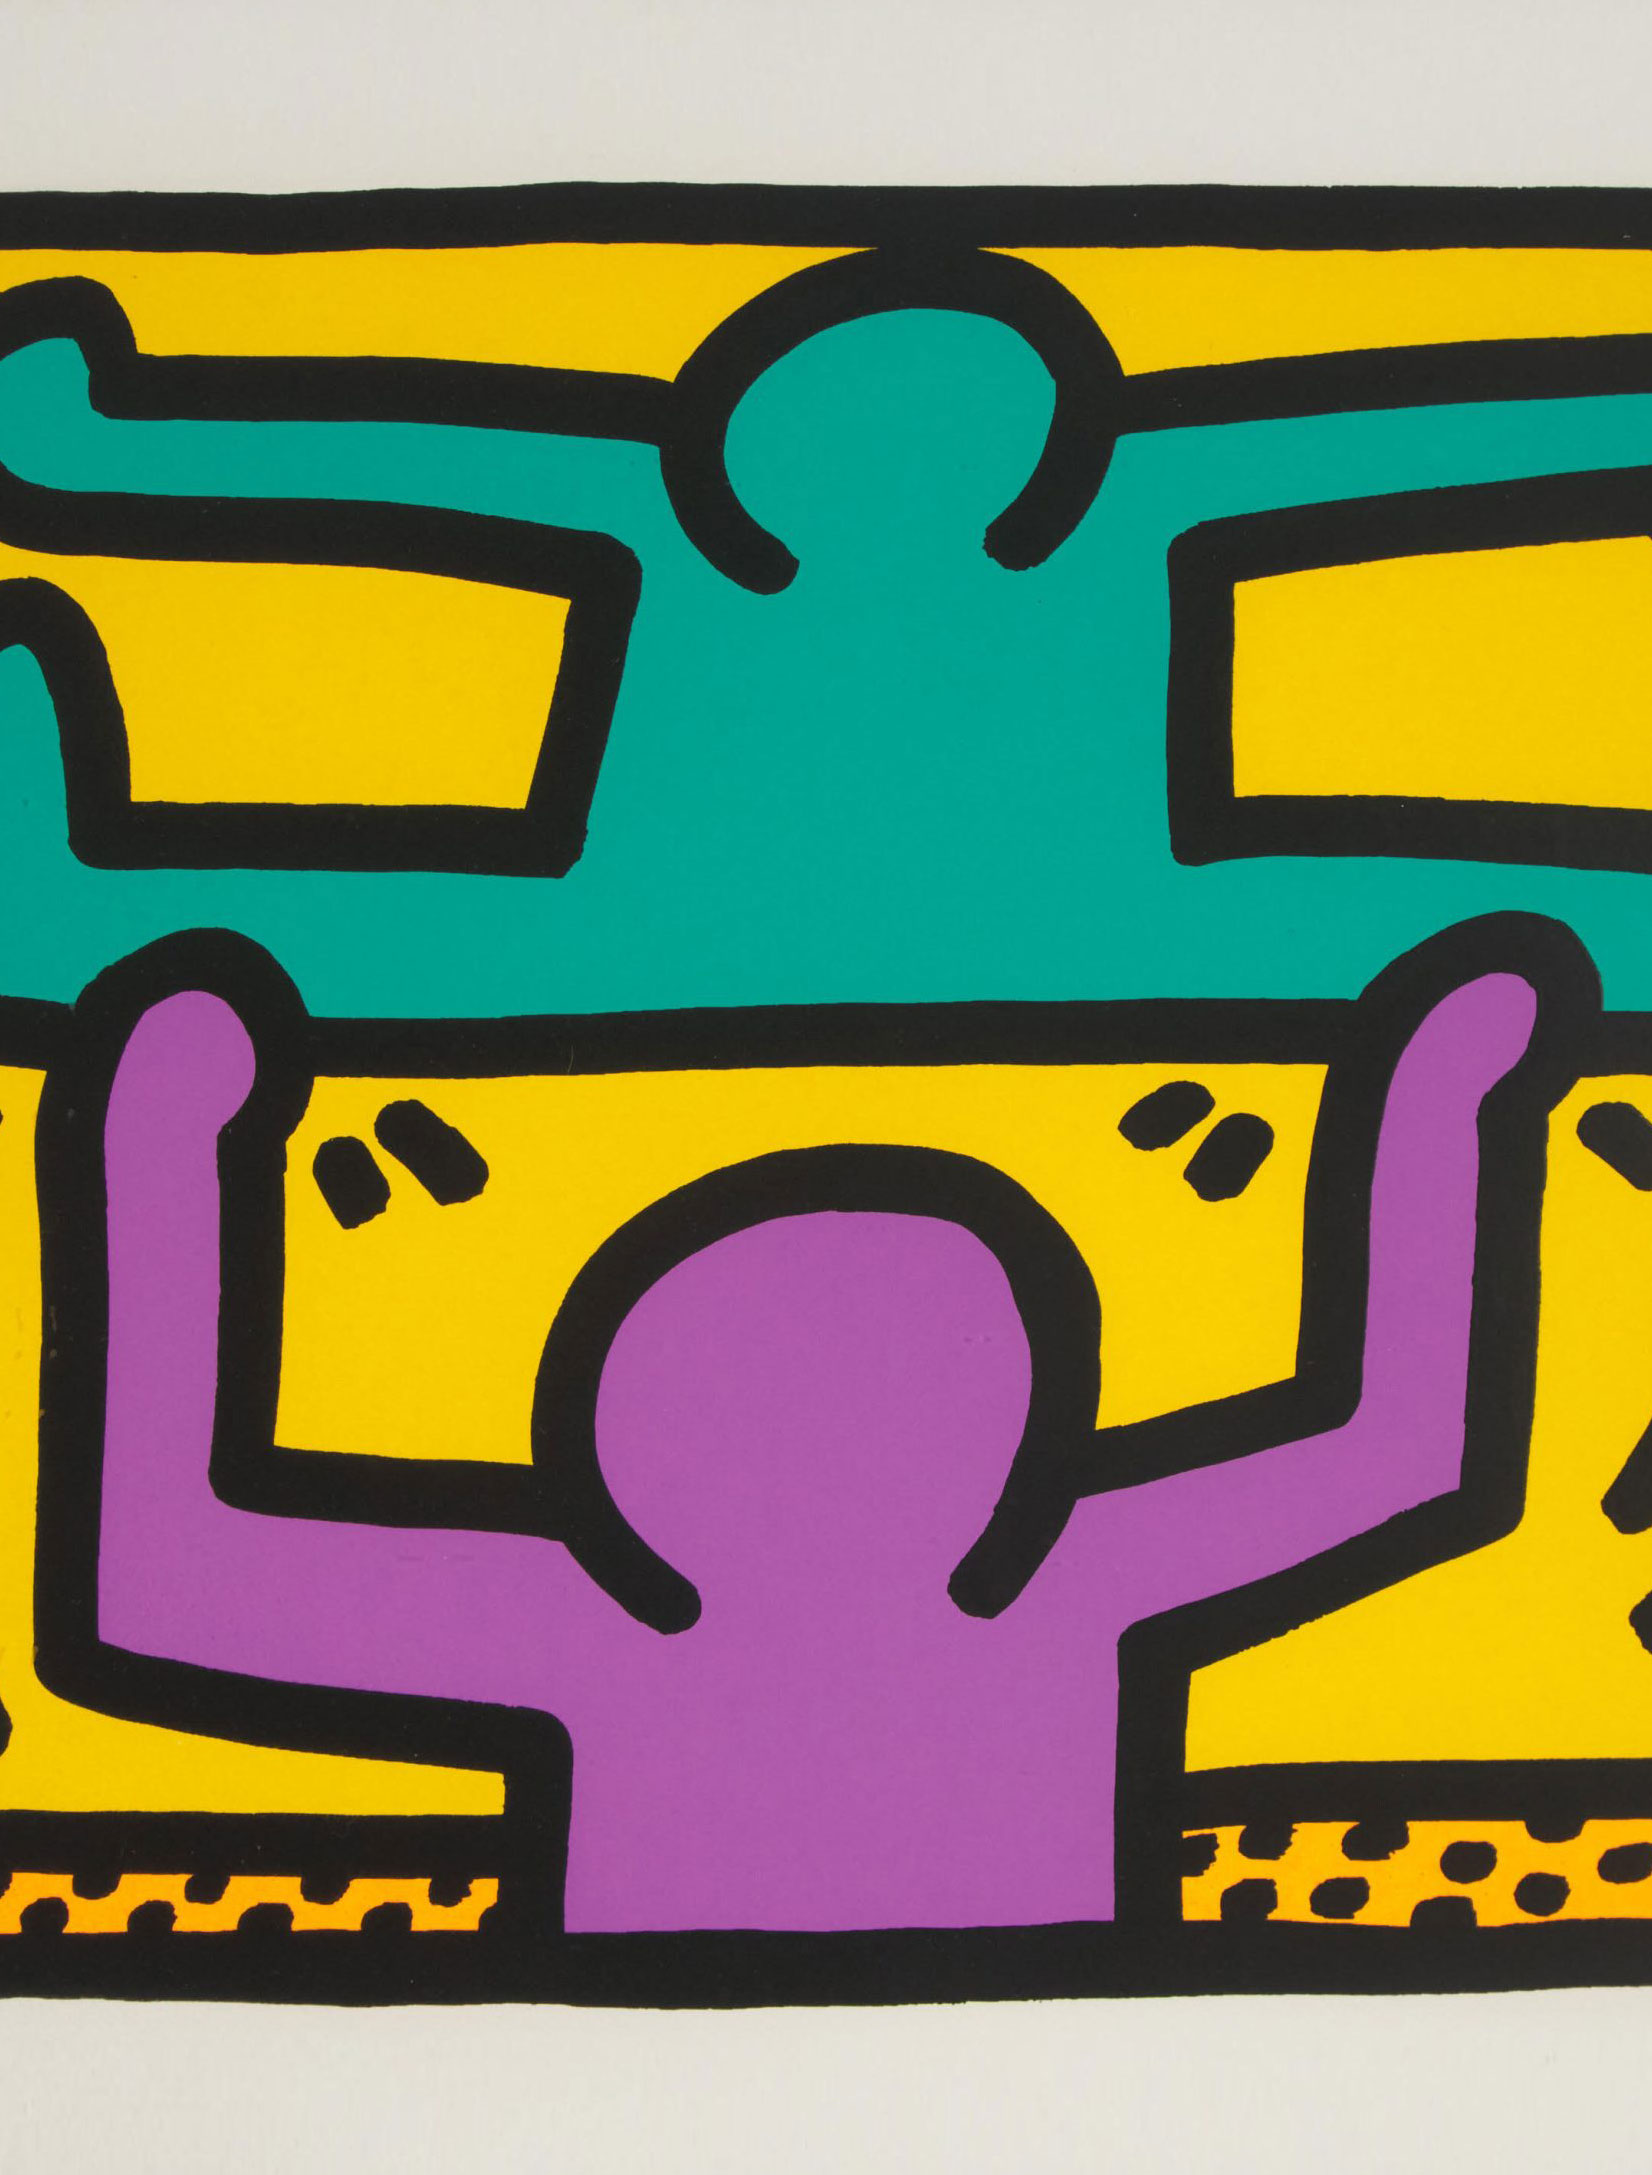 Hope and Beauty: The Inimitable Work of Keith Haring